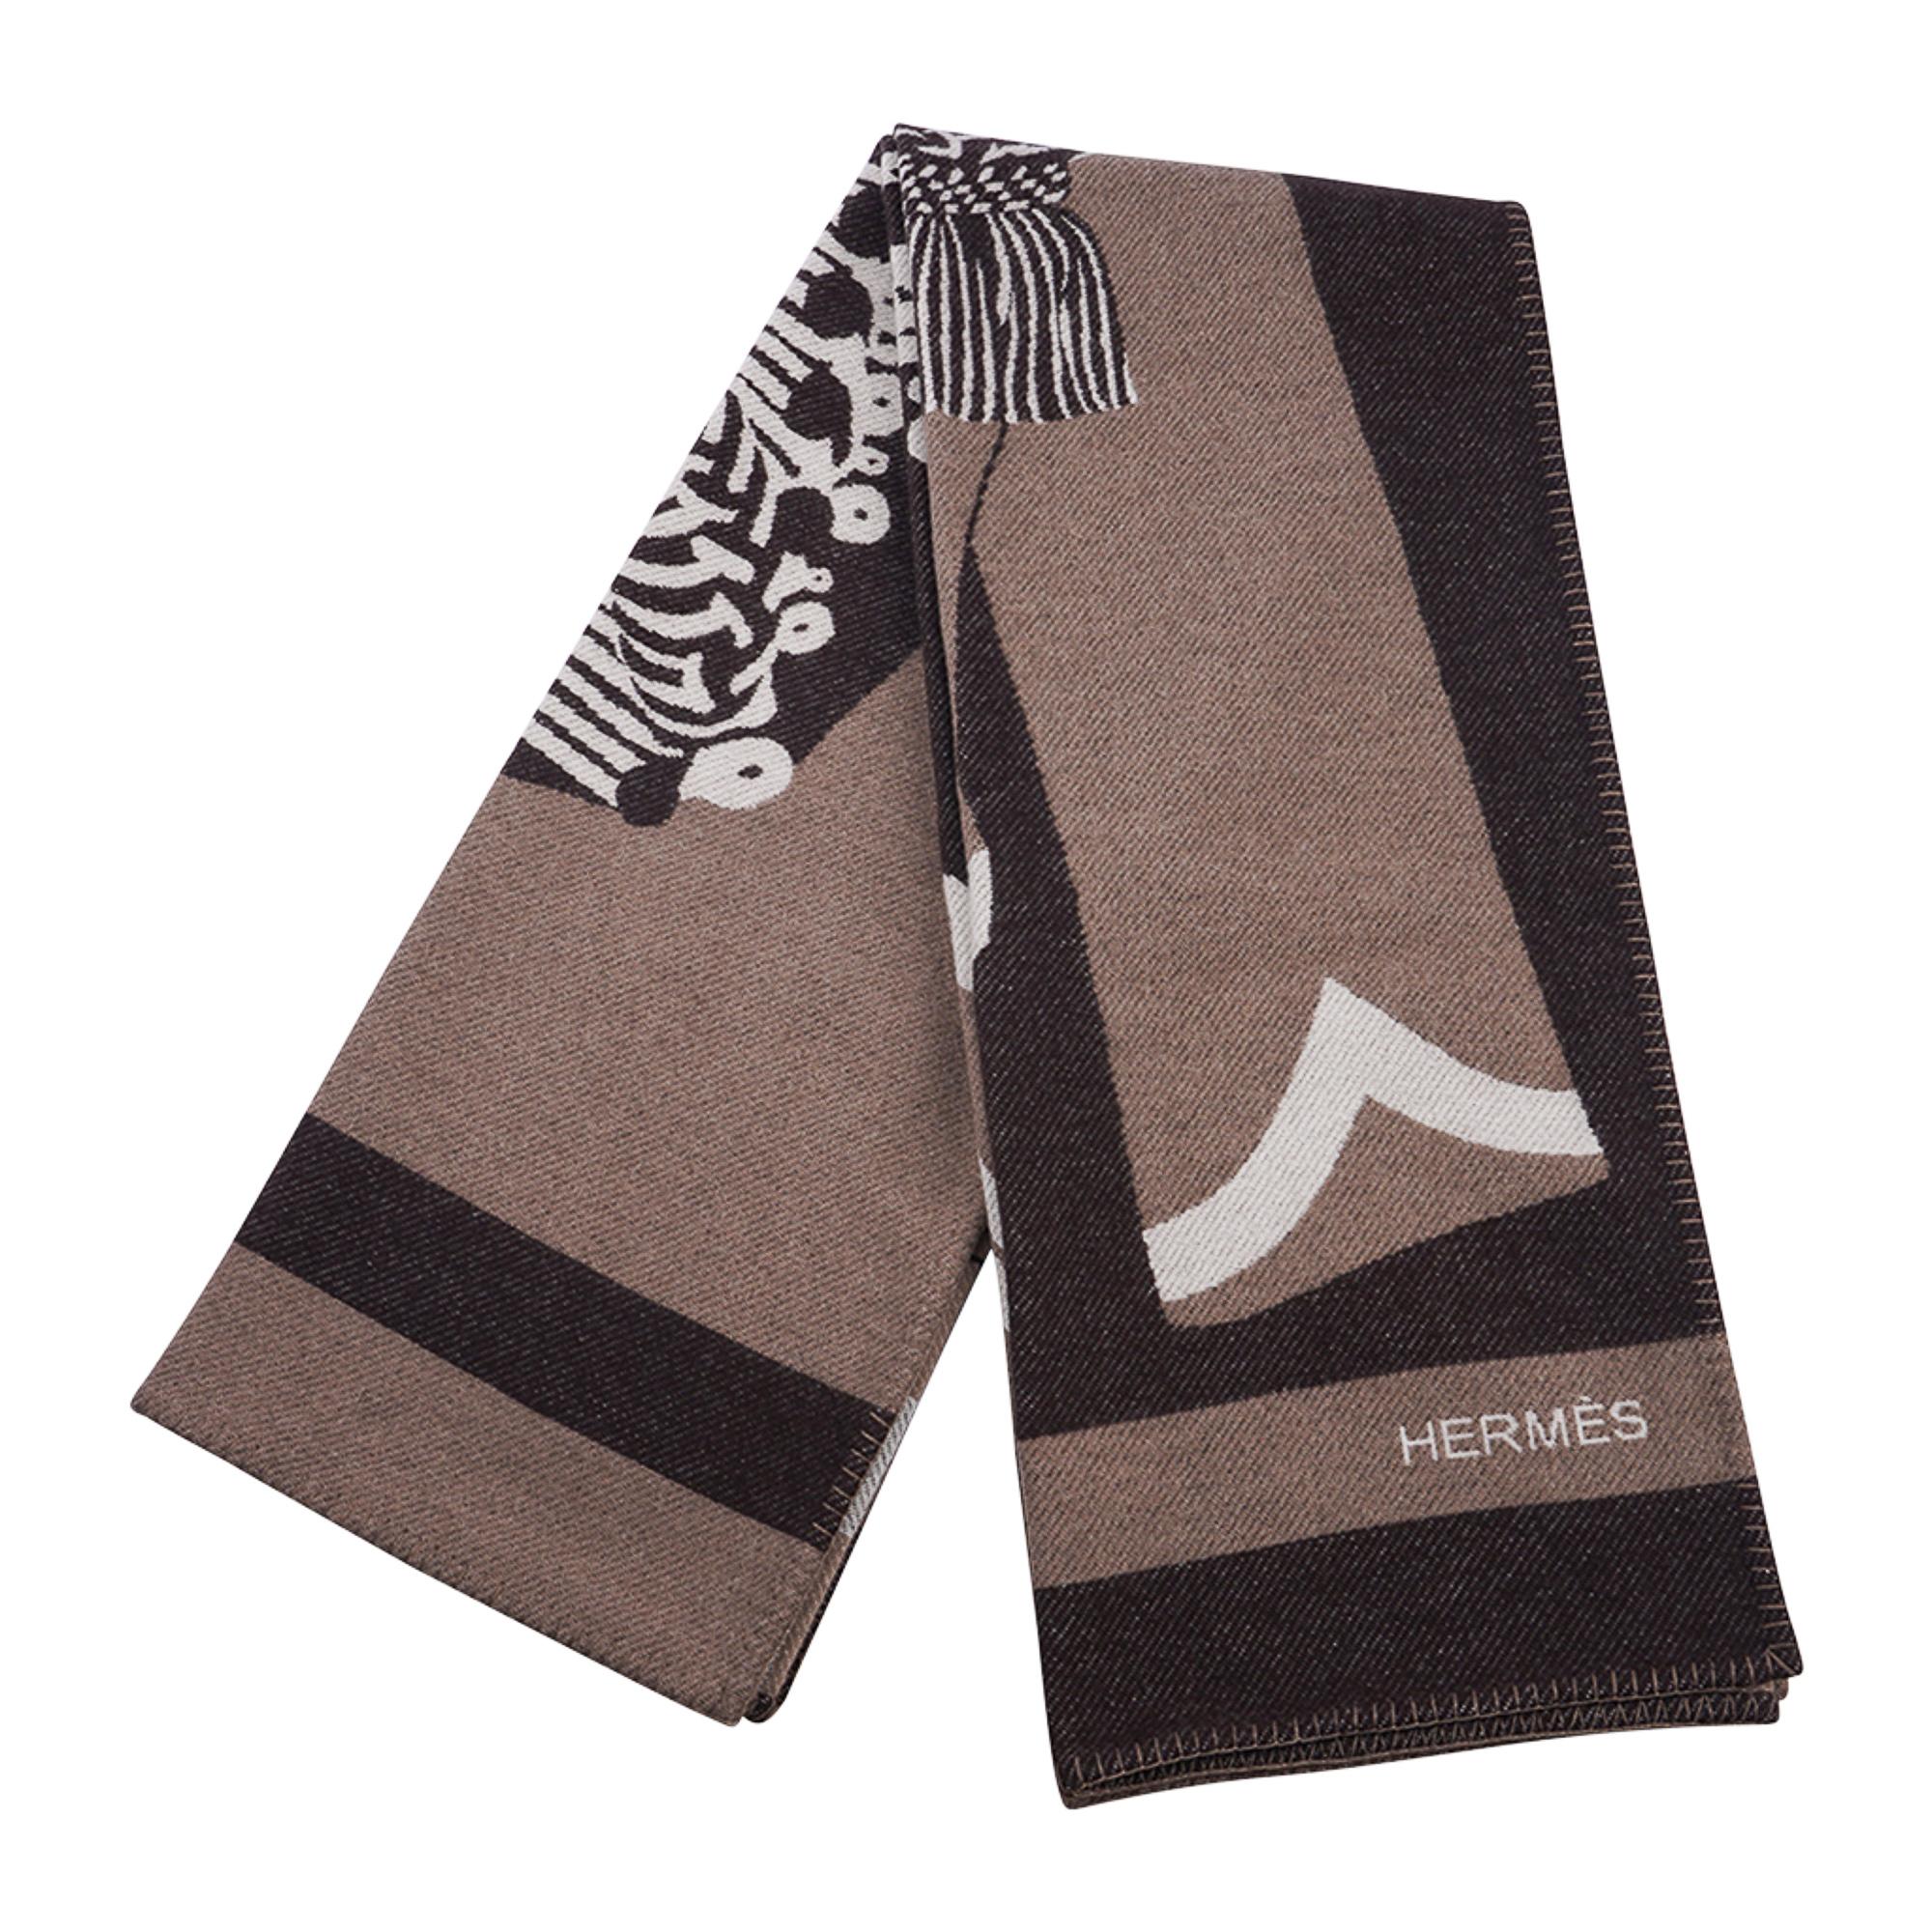 Mightychic offers an Hermes Brandenbourgs blanket featured in Ecorce.
Cathy Latham's iconic design features the military jacket worn by Napoleon III's Imperial Guard.
This striking blanket is created from a jacquard 90% Merino Wool and 10%